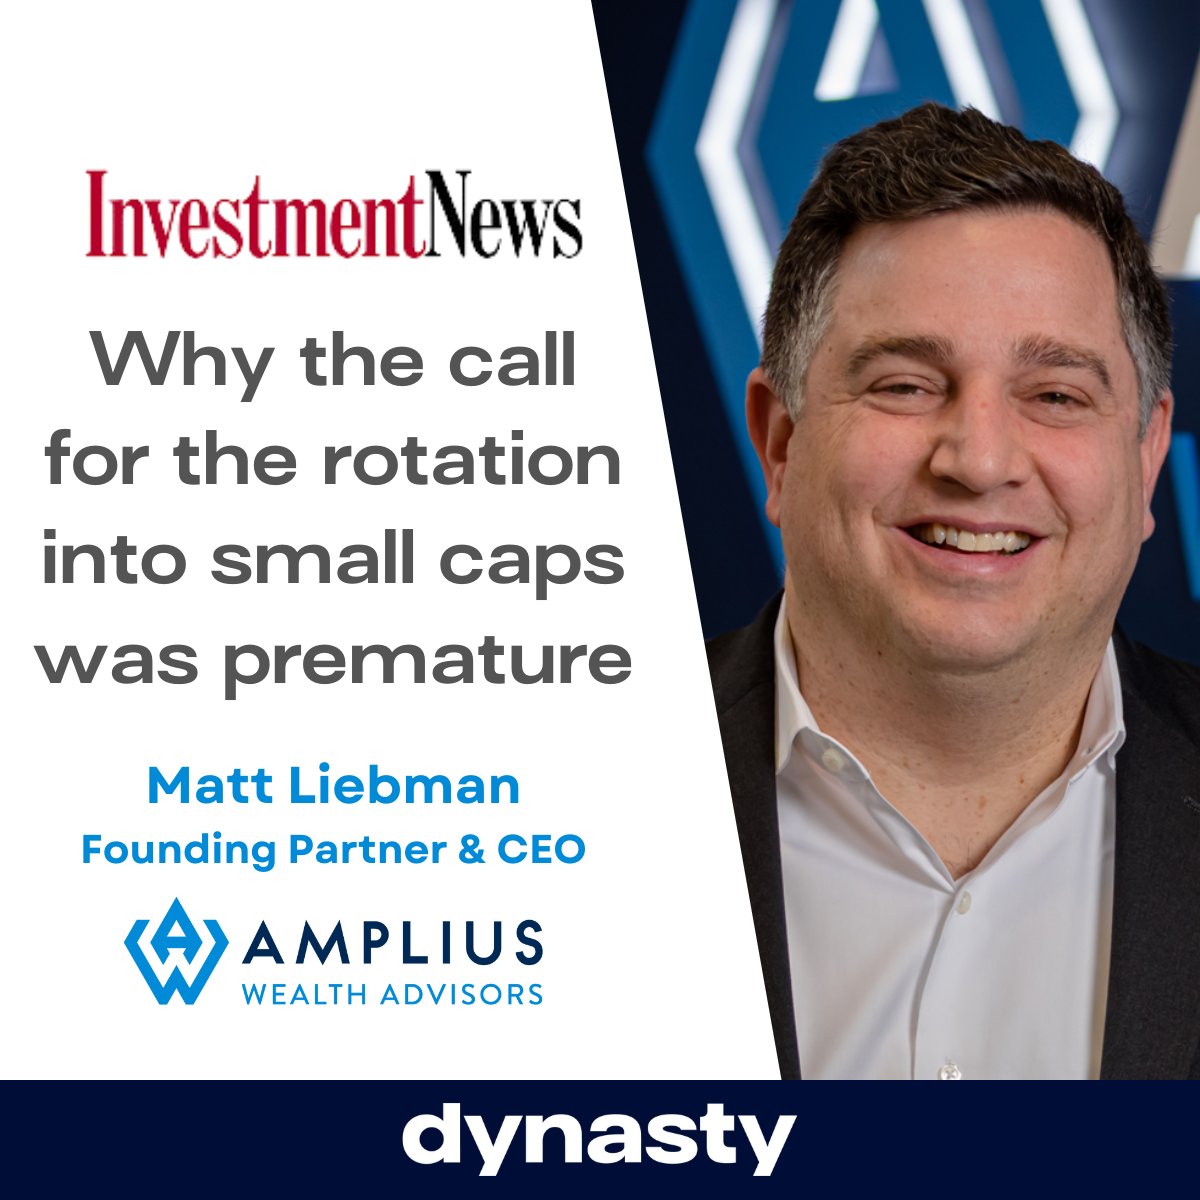 In a recent article from InvestmentNews, Dynasty Network Partner Matt Liebman from @AmpliusWealth, weighs in on the underlying factors and long-term potential of small-caps bit.ly/3ysTcVA